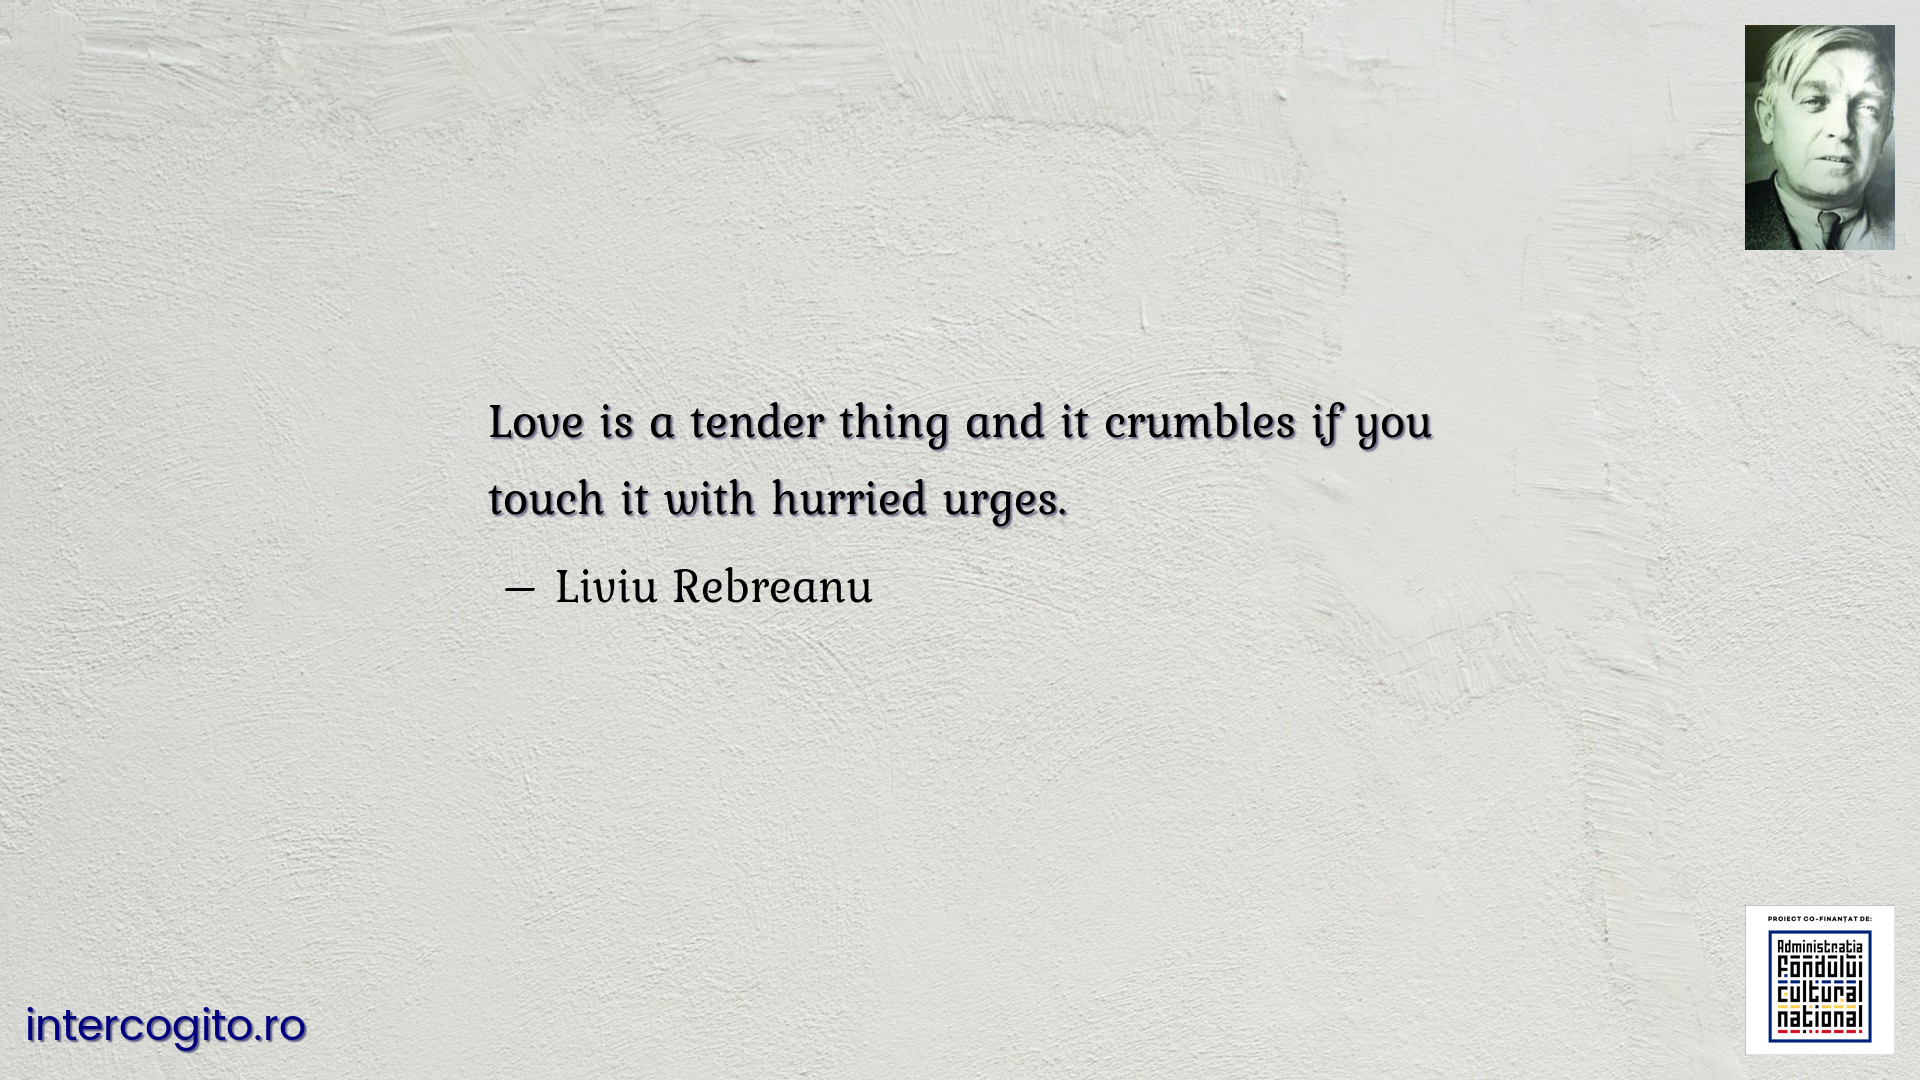 Love is a tender thing and it crumbles if you touch it with hurried urges.